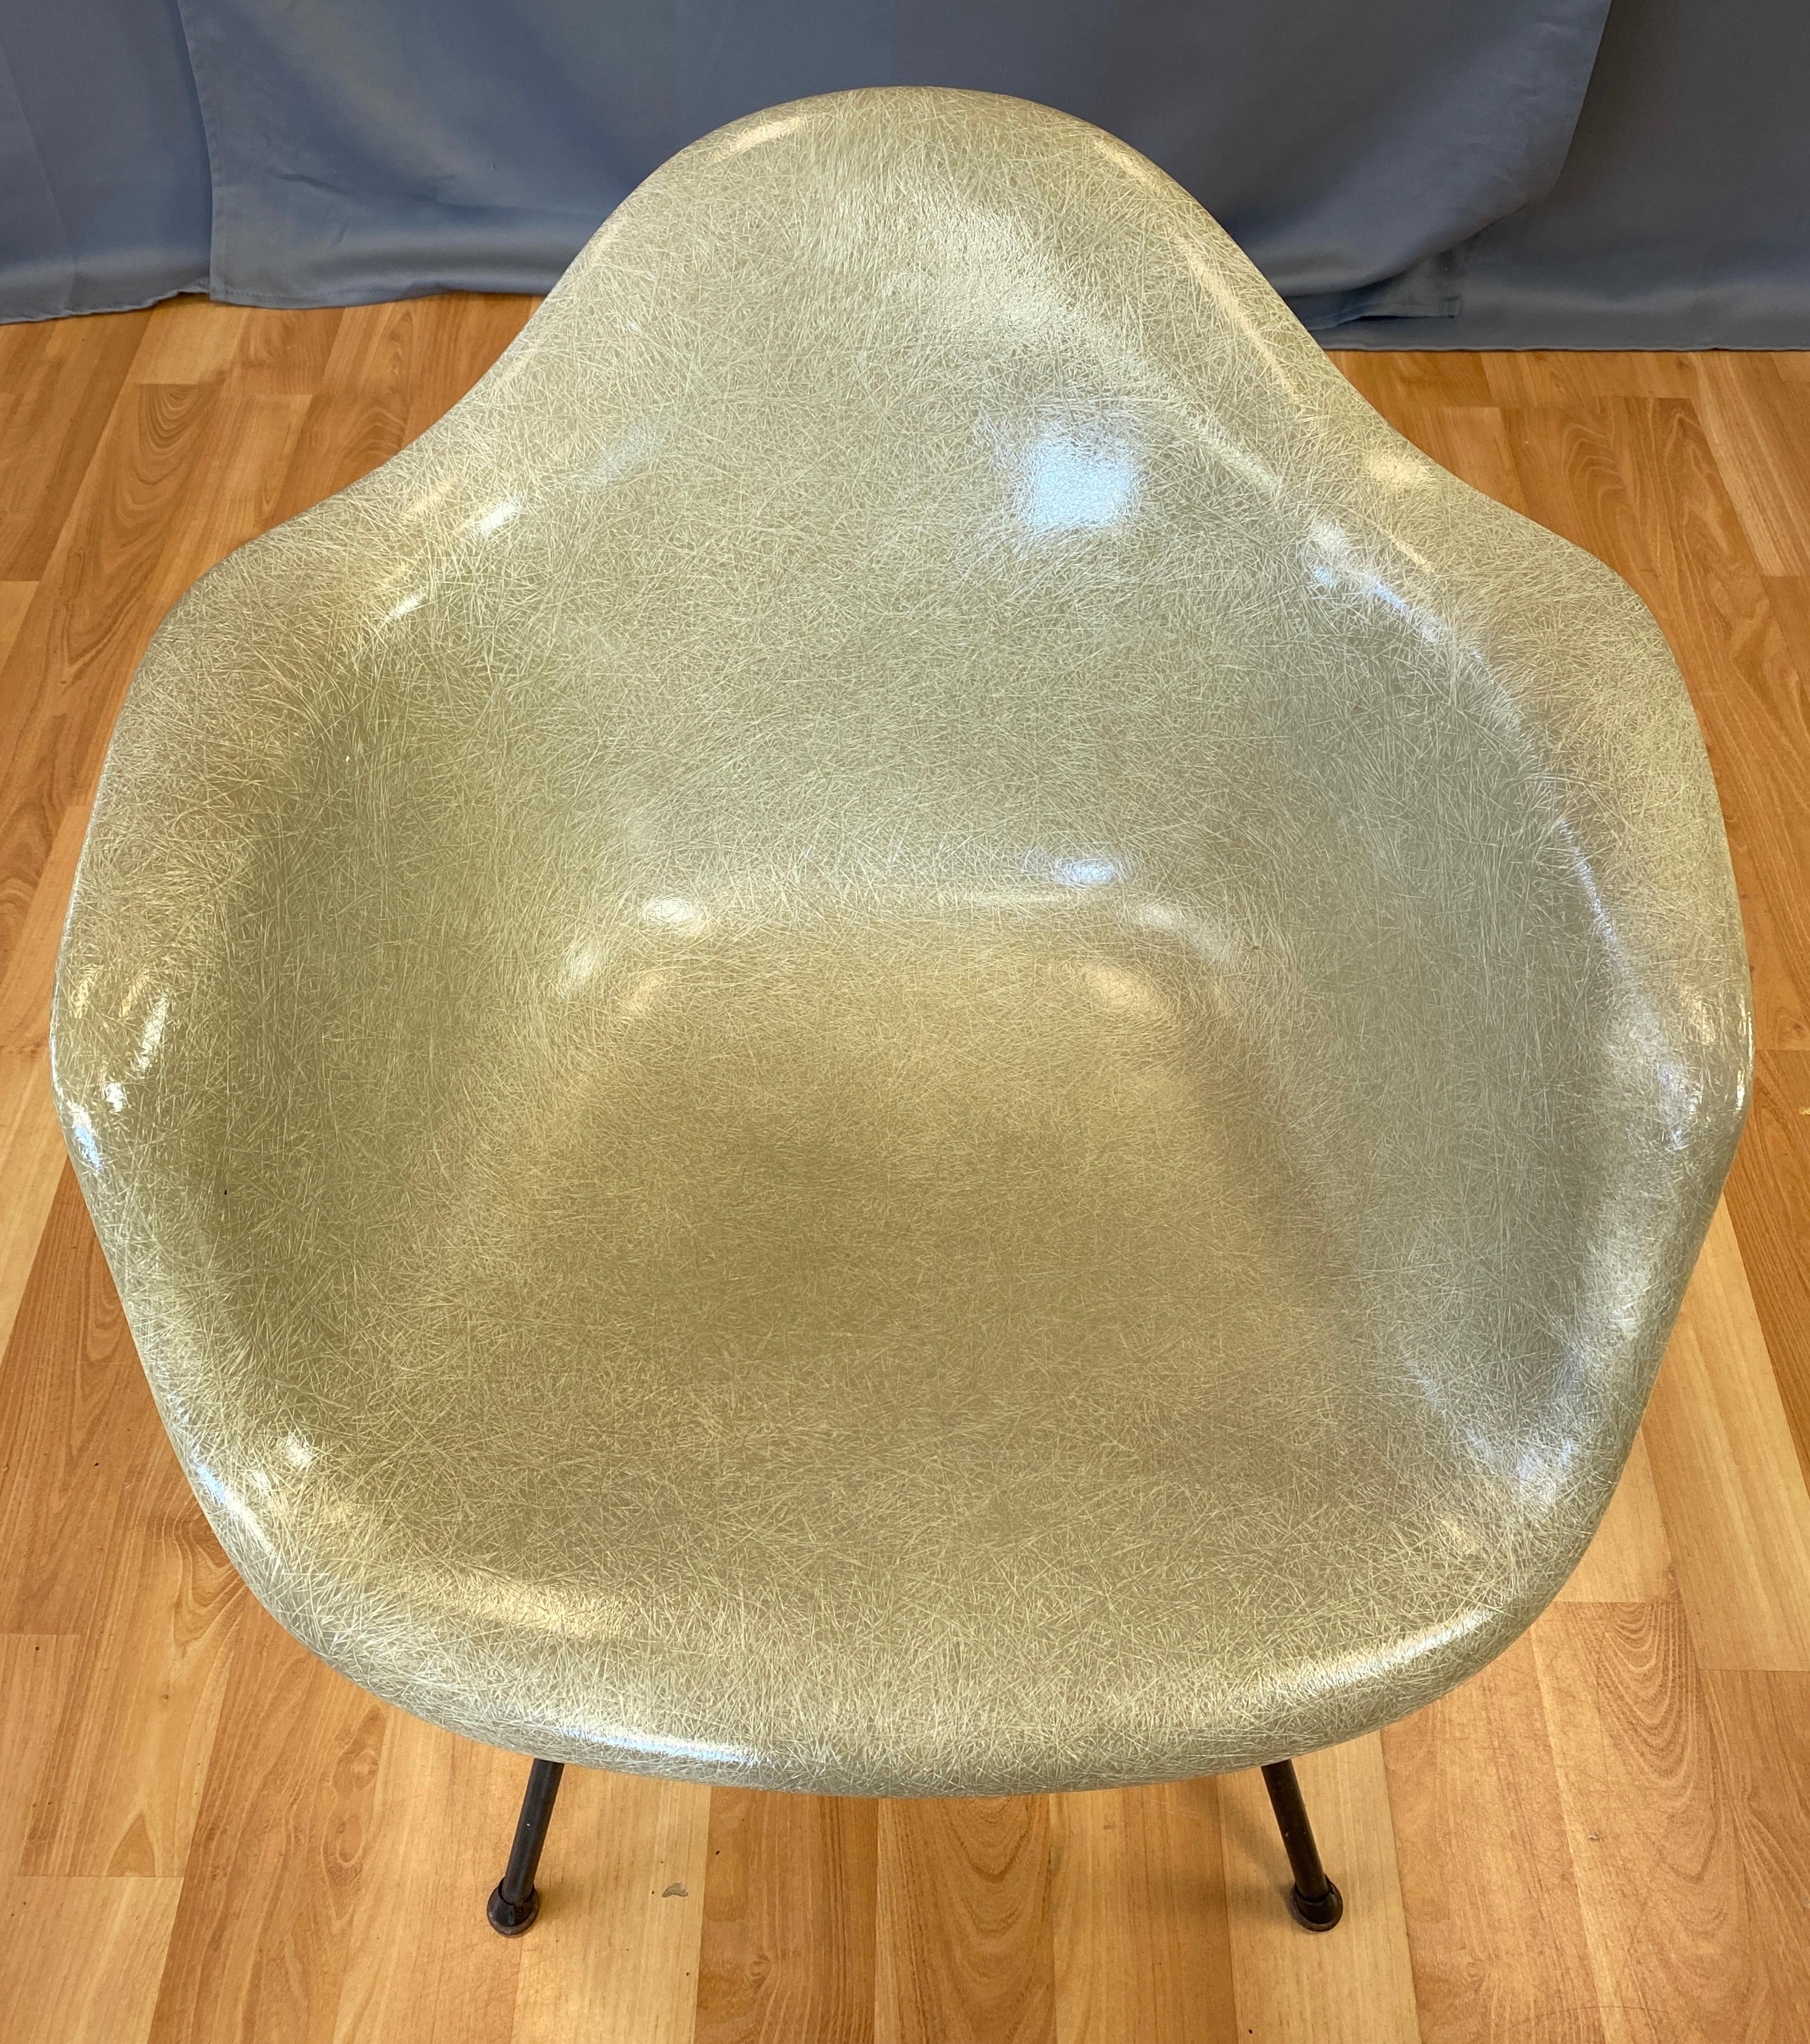 Offered here is a Charles Eames designed rope edge fiberglass shell armchair for Herman Miller, color is Greige.
This is a first year, 1949-1950 production of the chair. This model was entered into Museum of Modern Art of New York's International